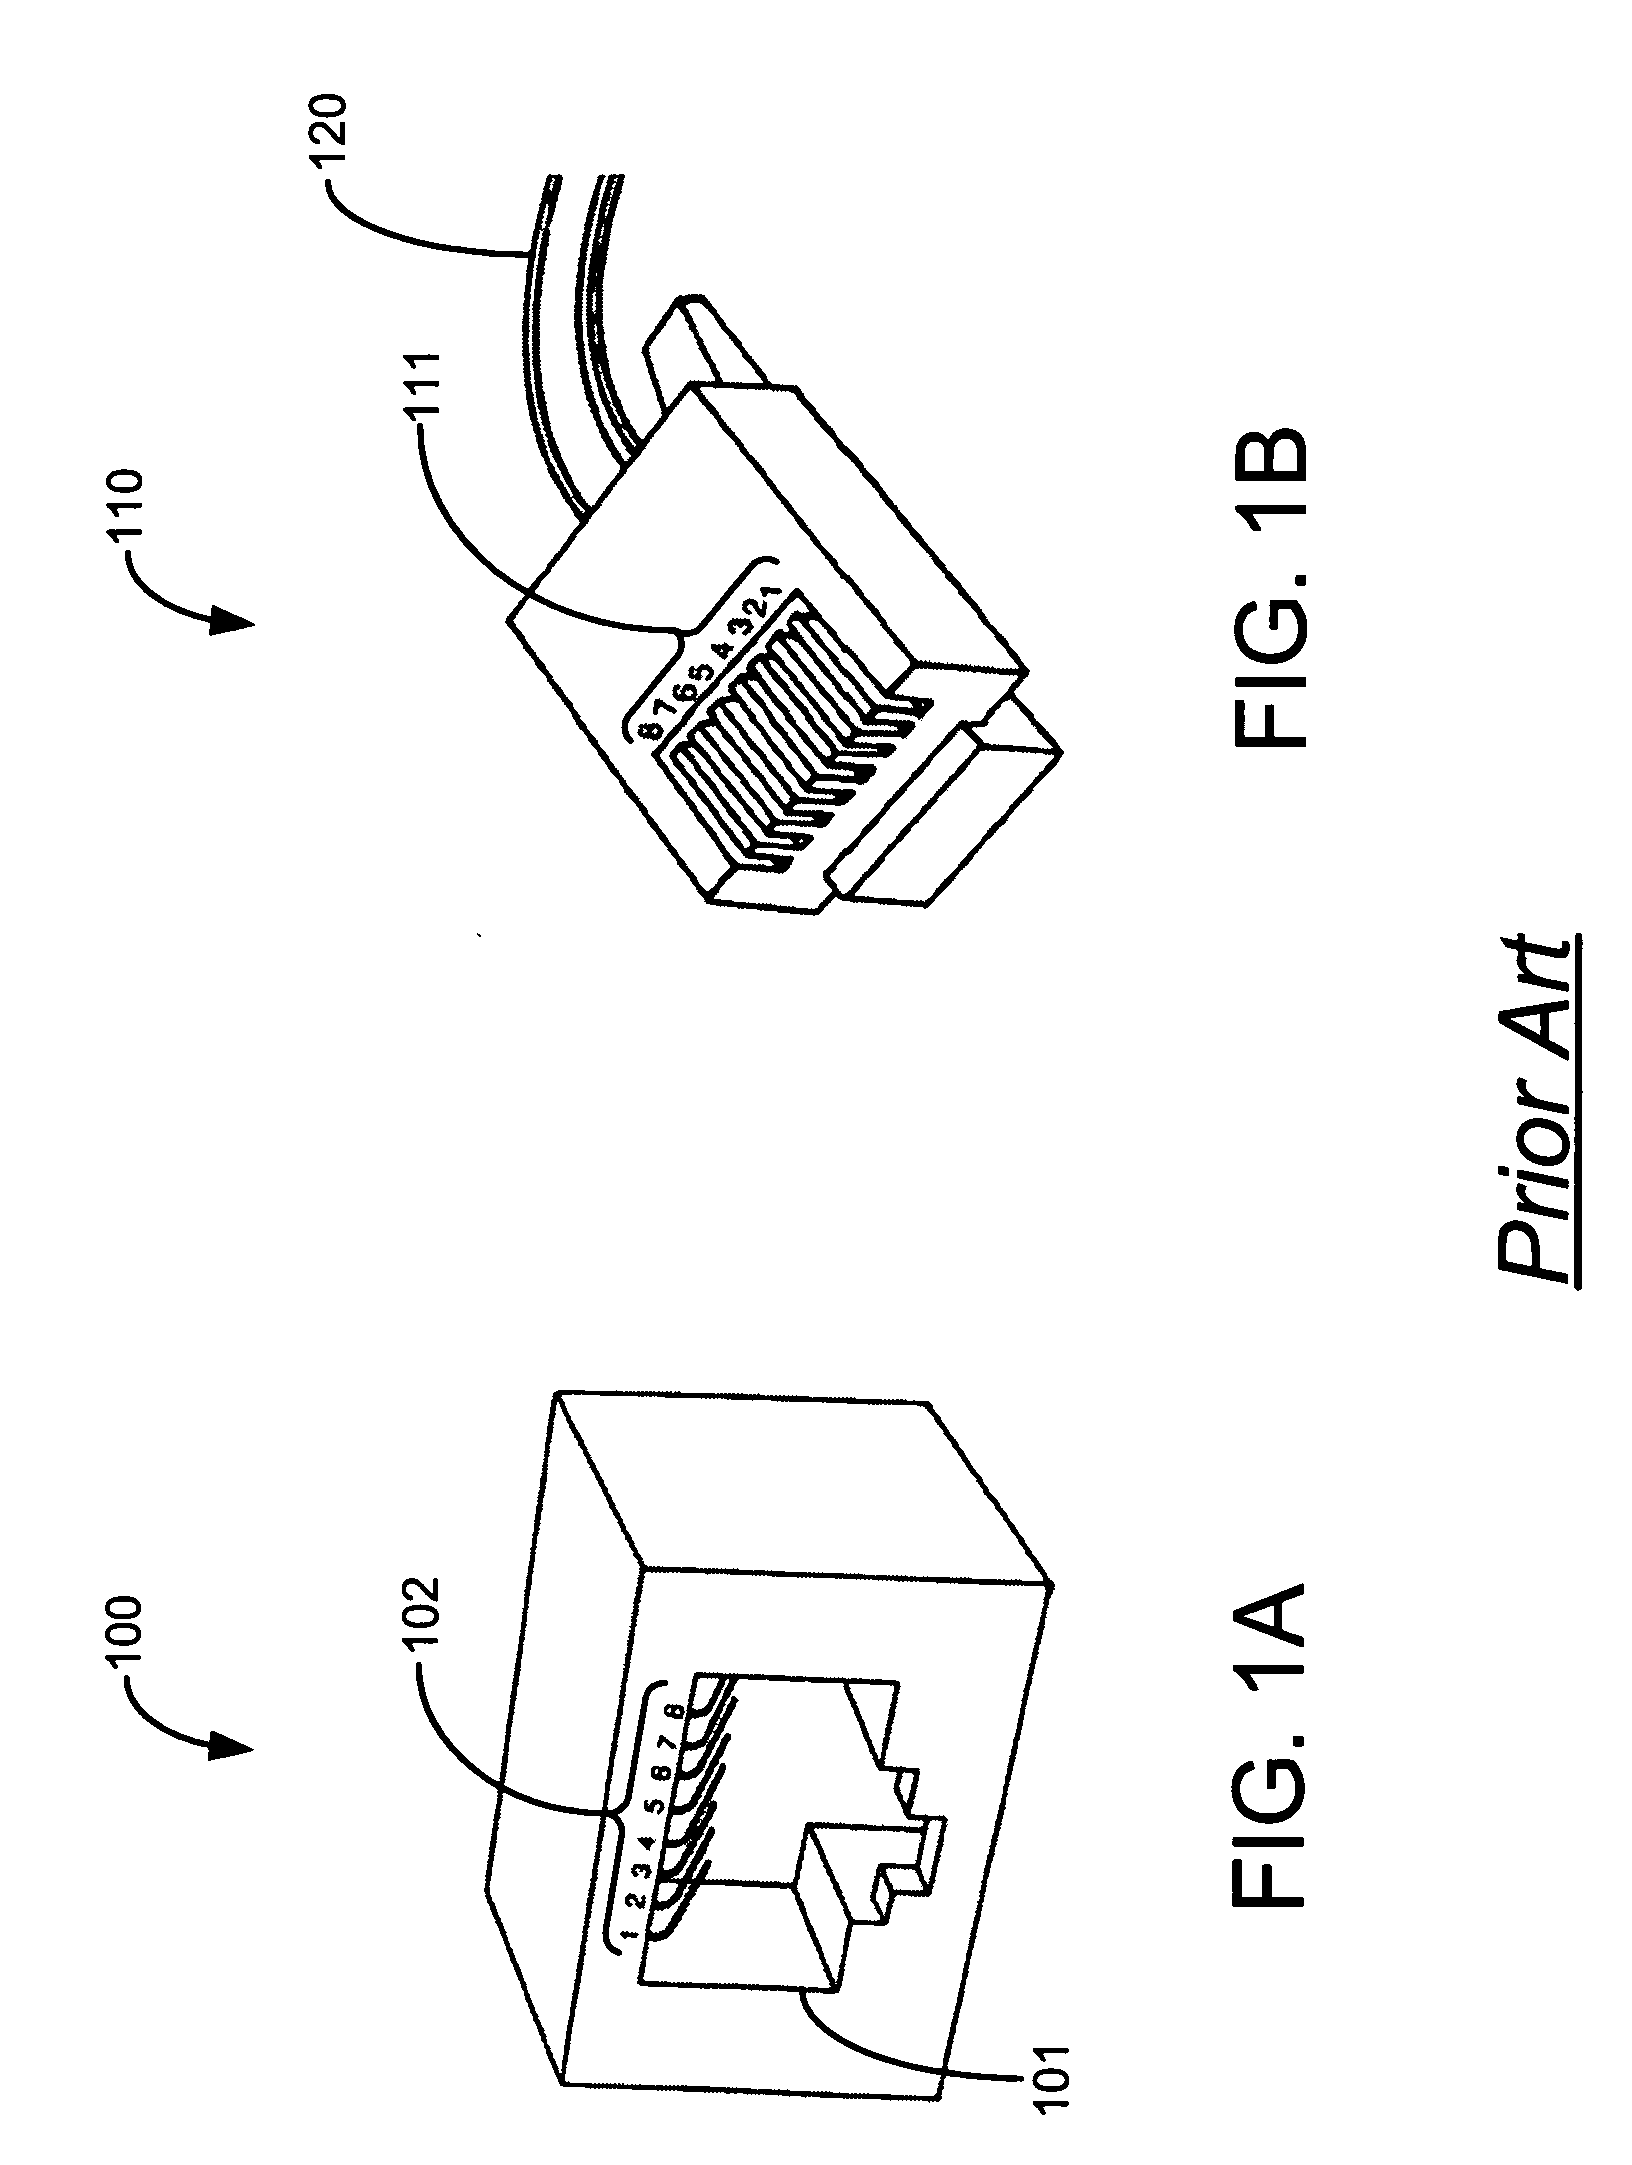 Systems and methods for dual power and data over a single cable